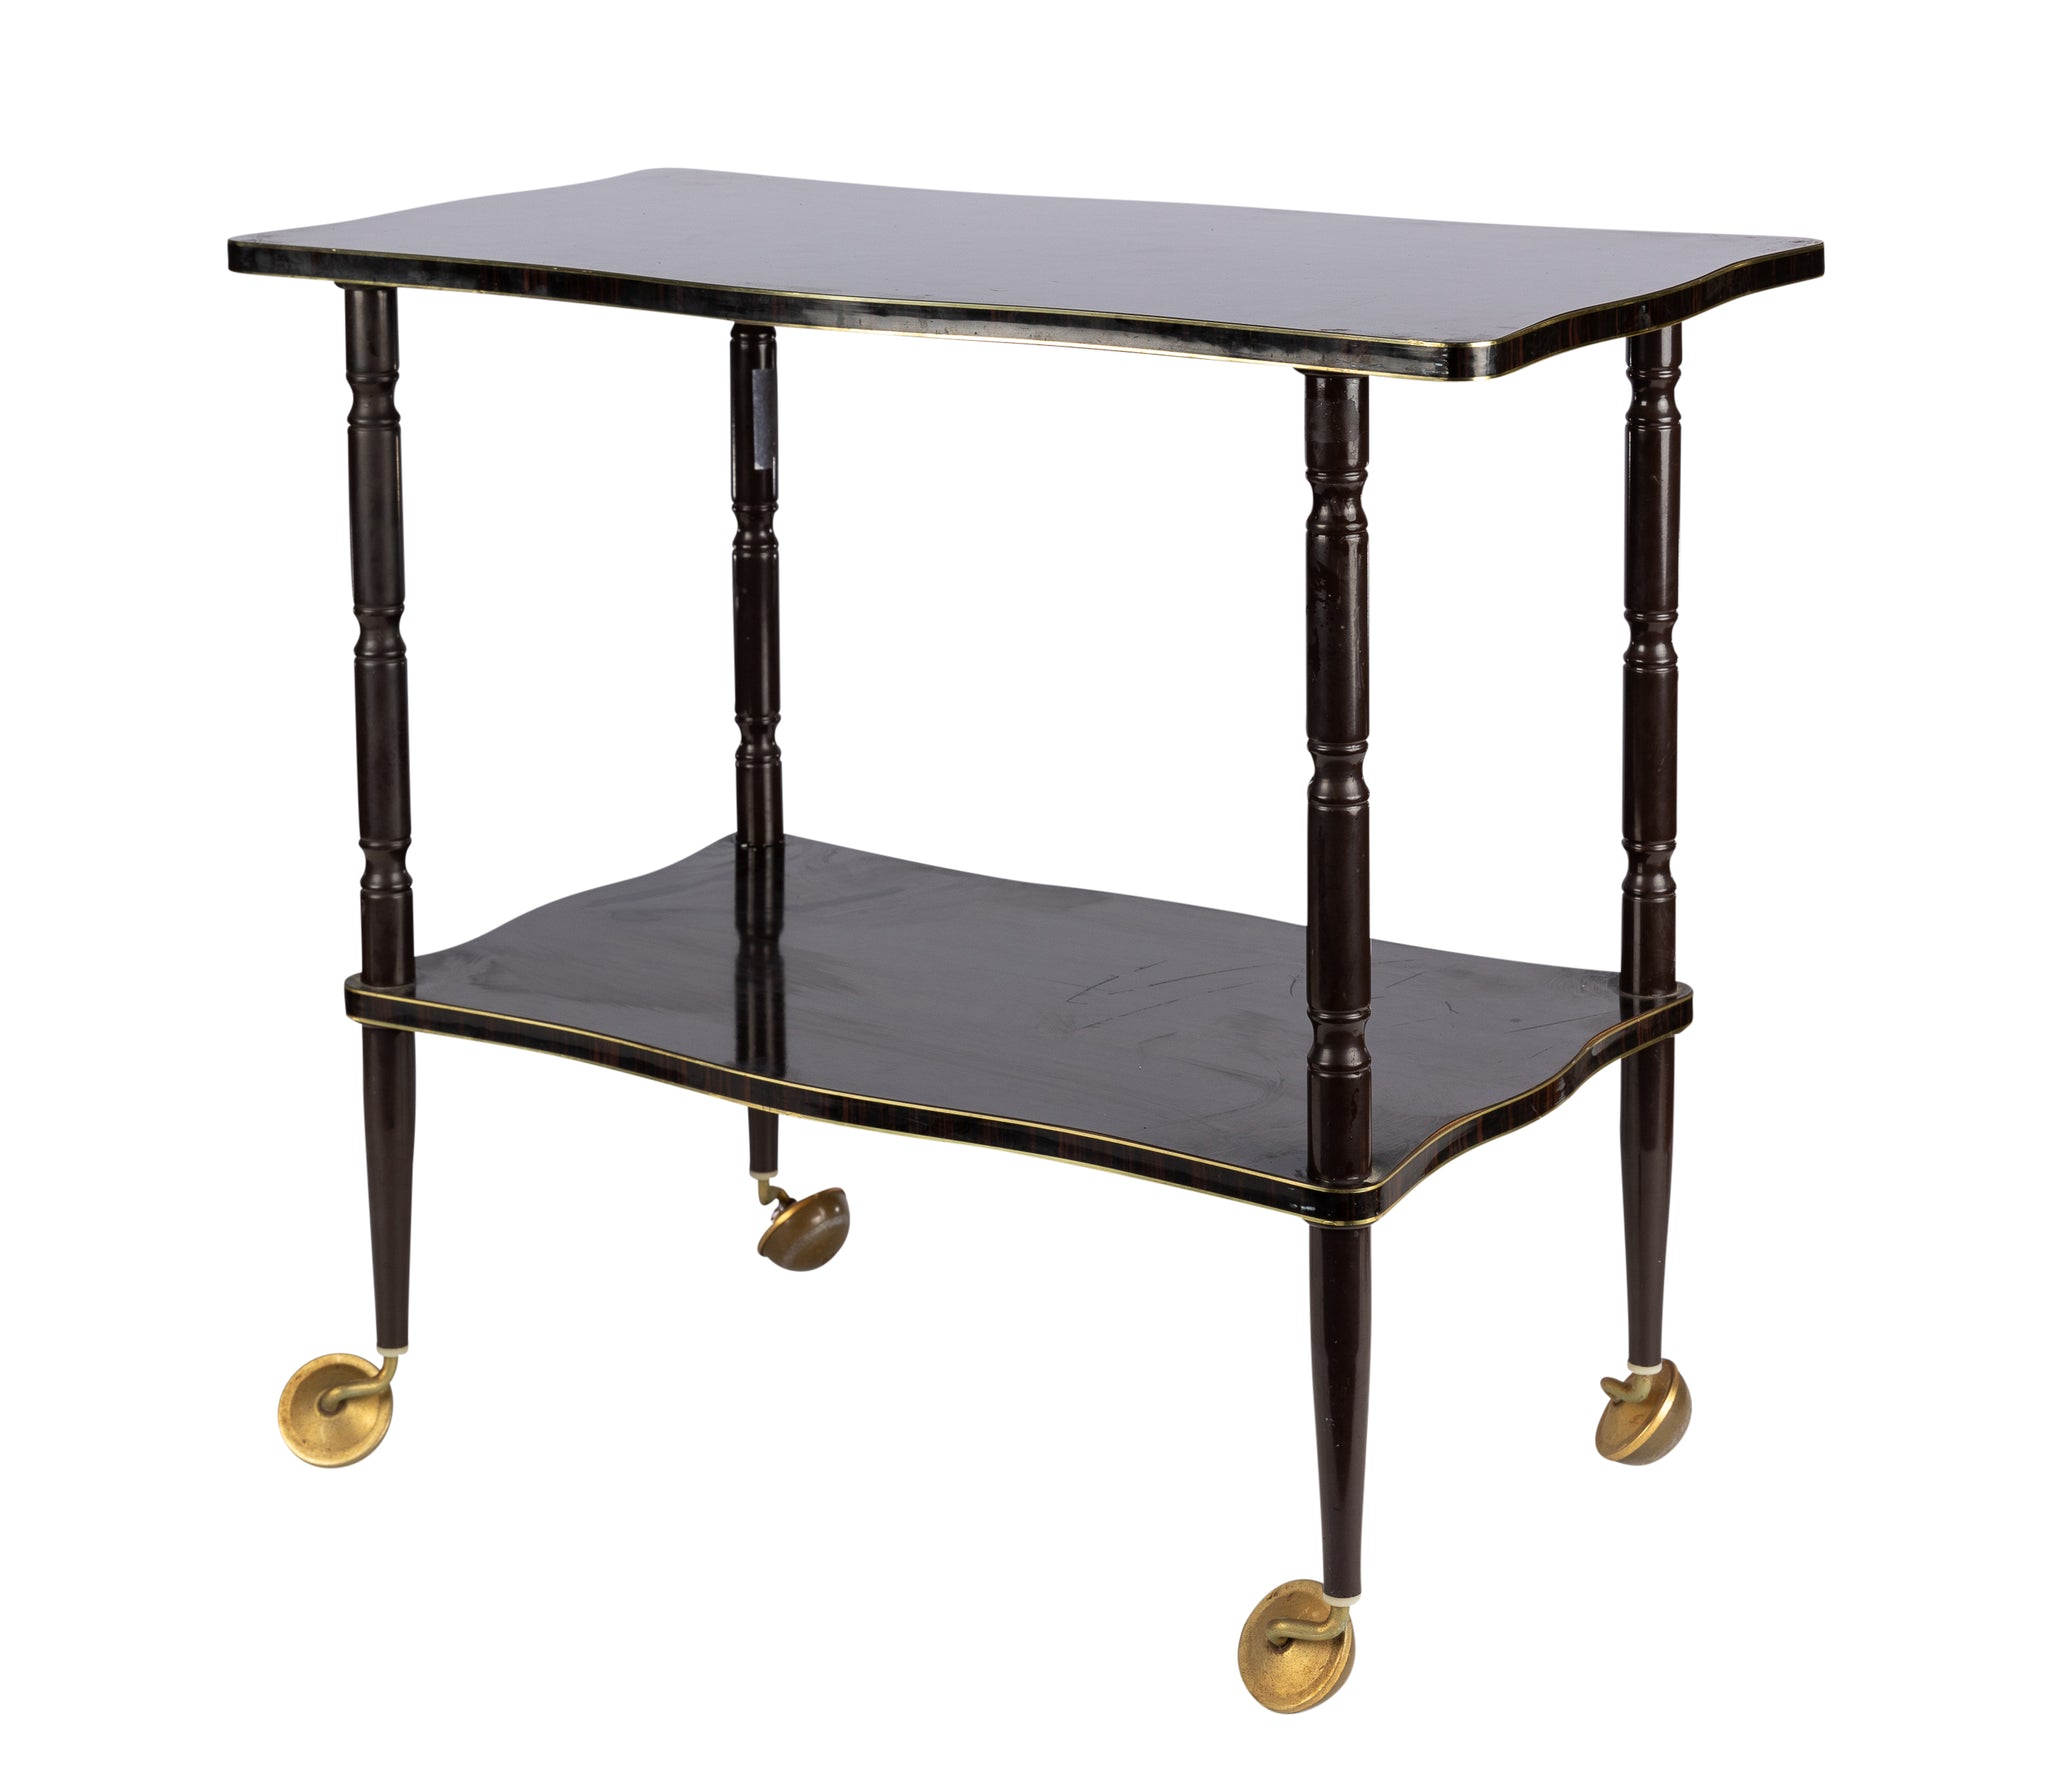 Vintage French bar cart on original castors from the French Alps